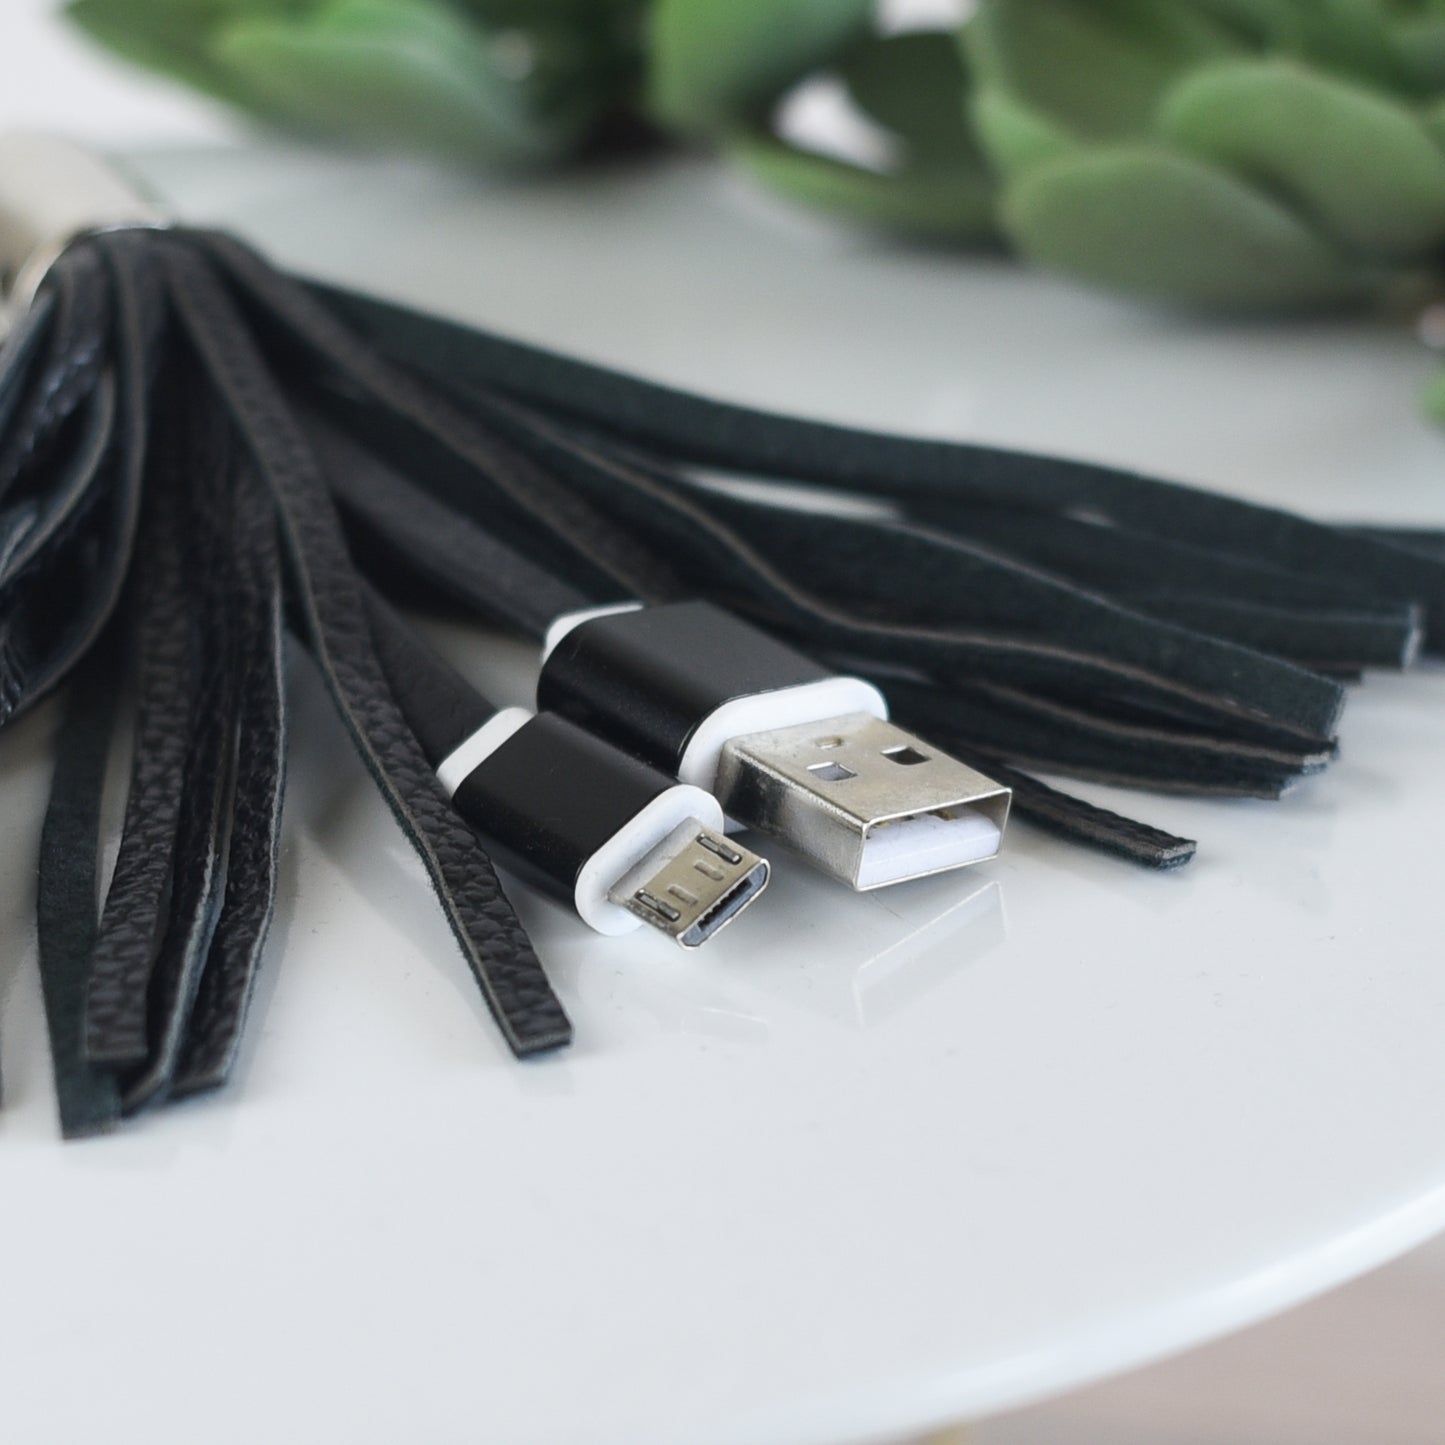 Tassel Key Chain with Micro USB Charging Cable